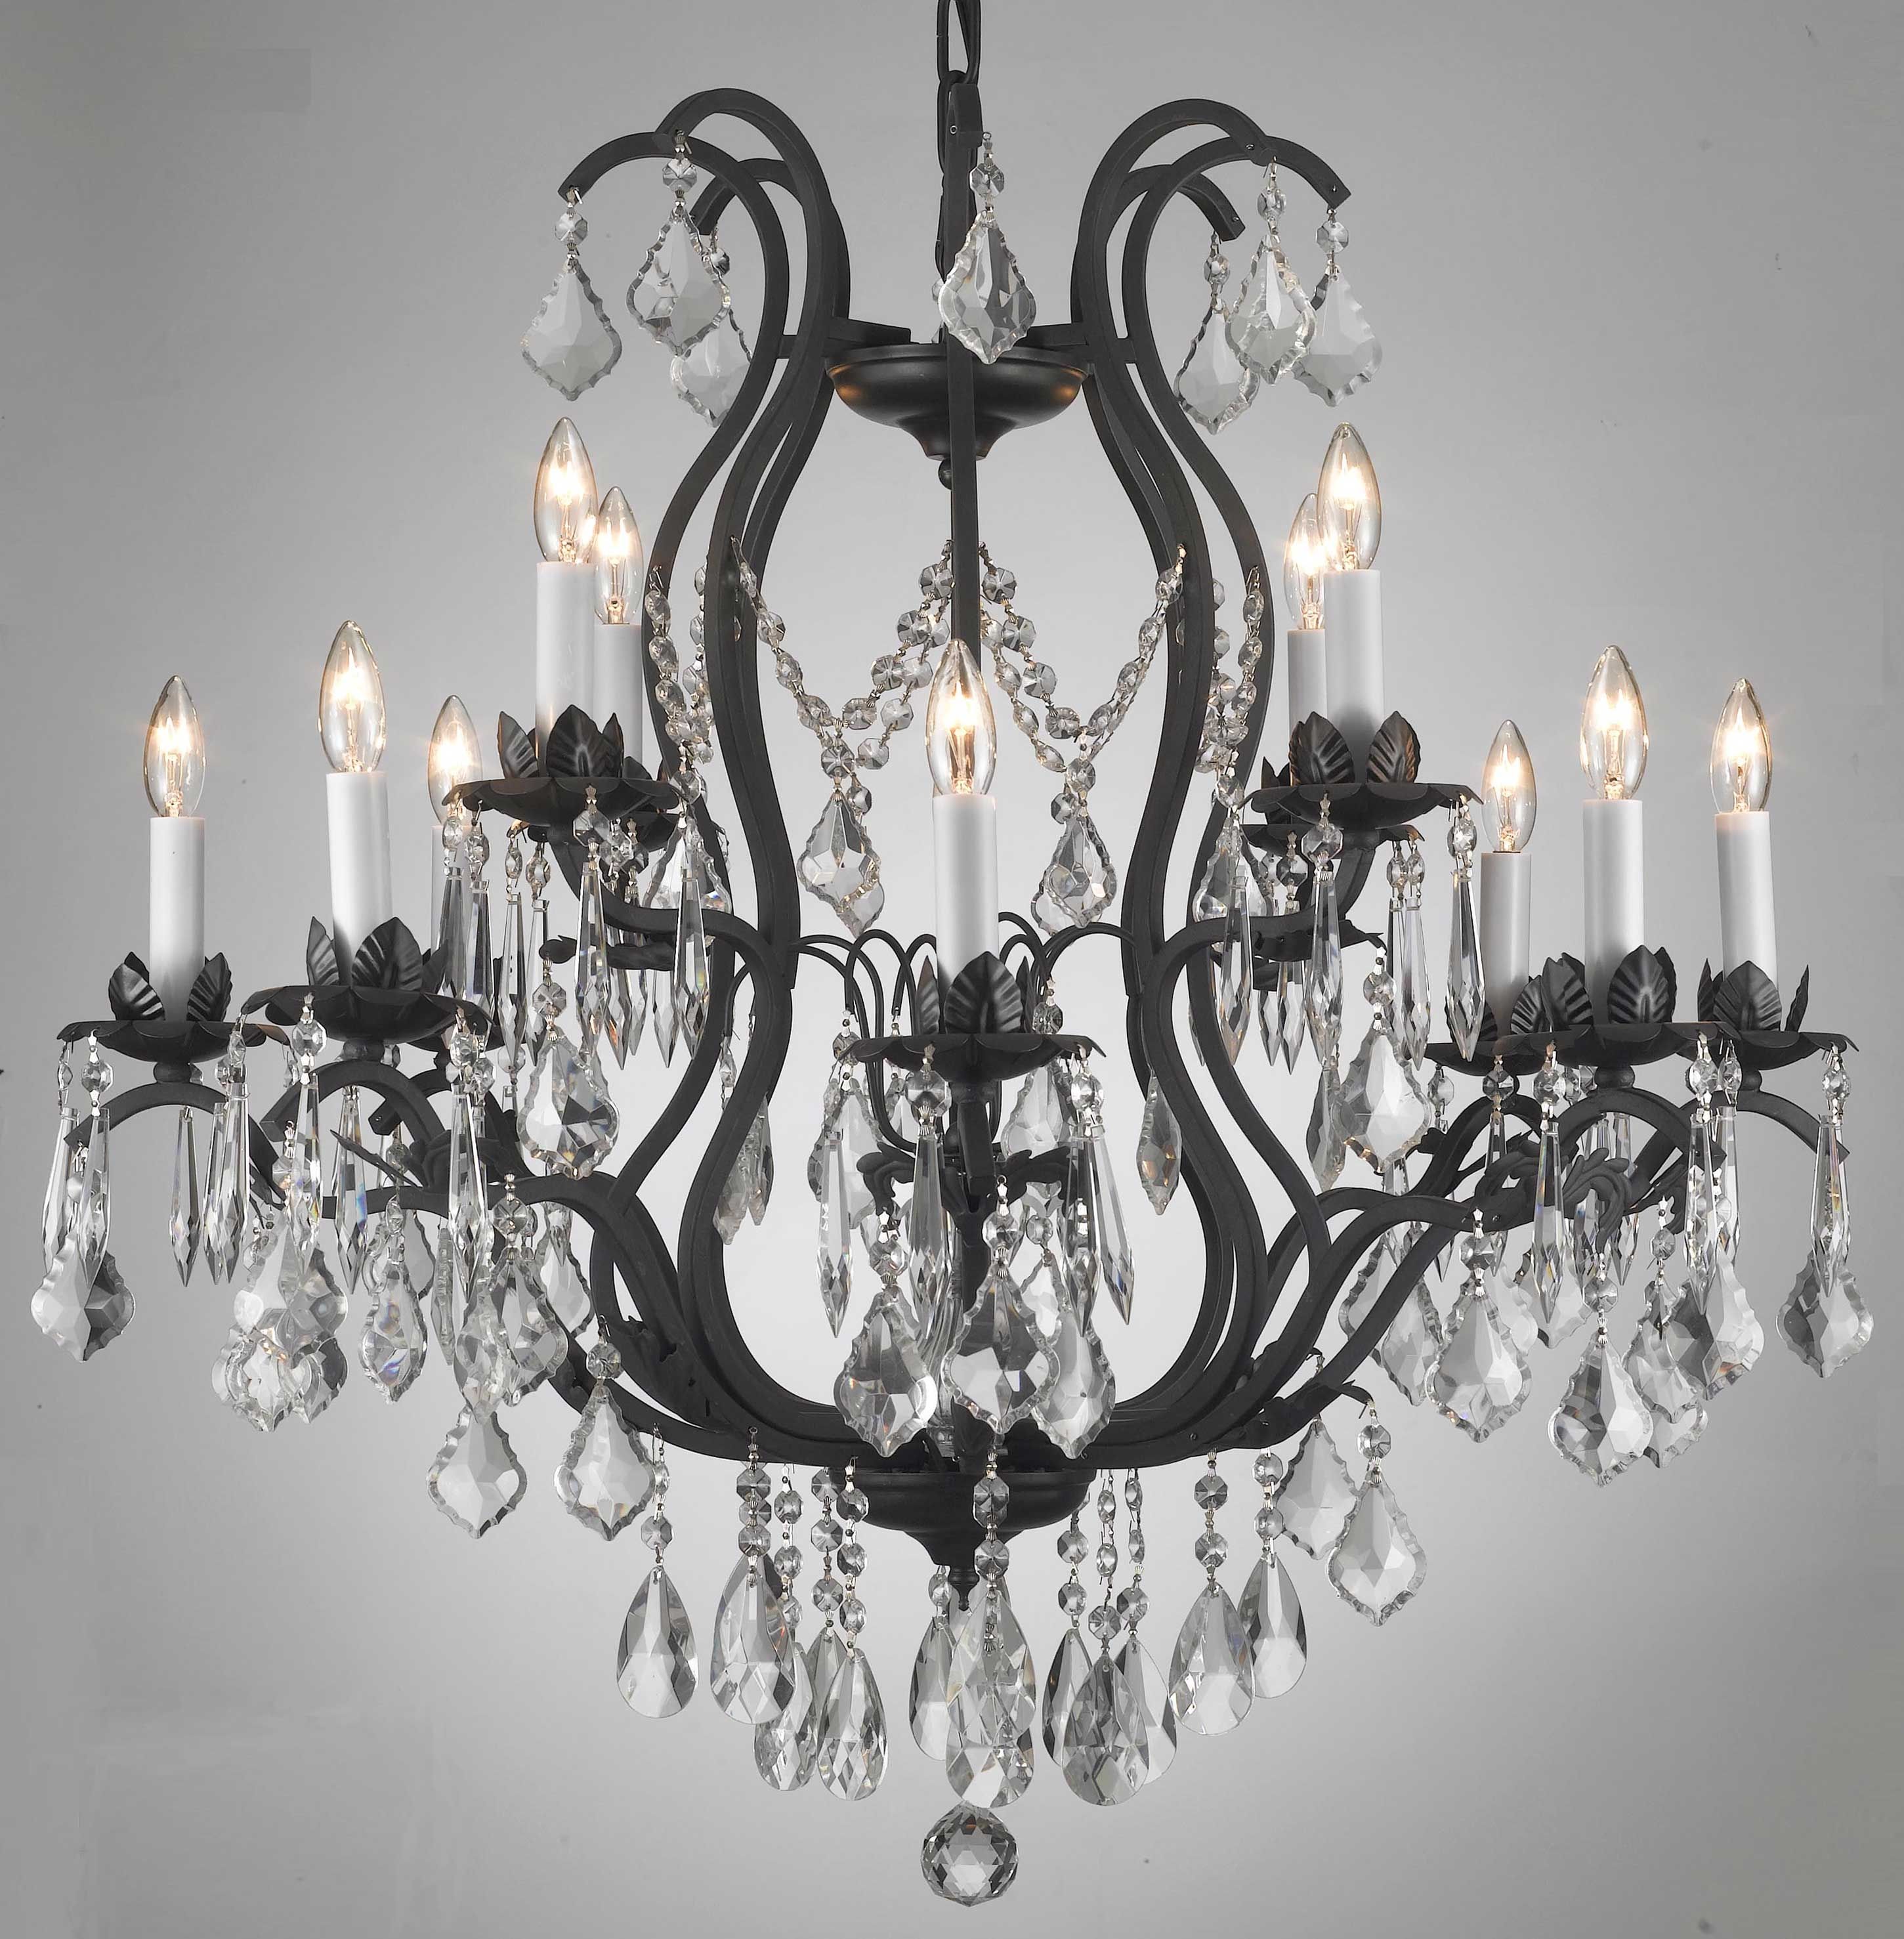 Chandelier Chandeliers Crystal Chandelier Crystal Chandeliers Throughout Wrought Iron Chandelier (View 8 of 15)